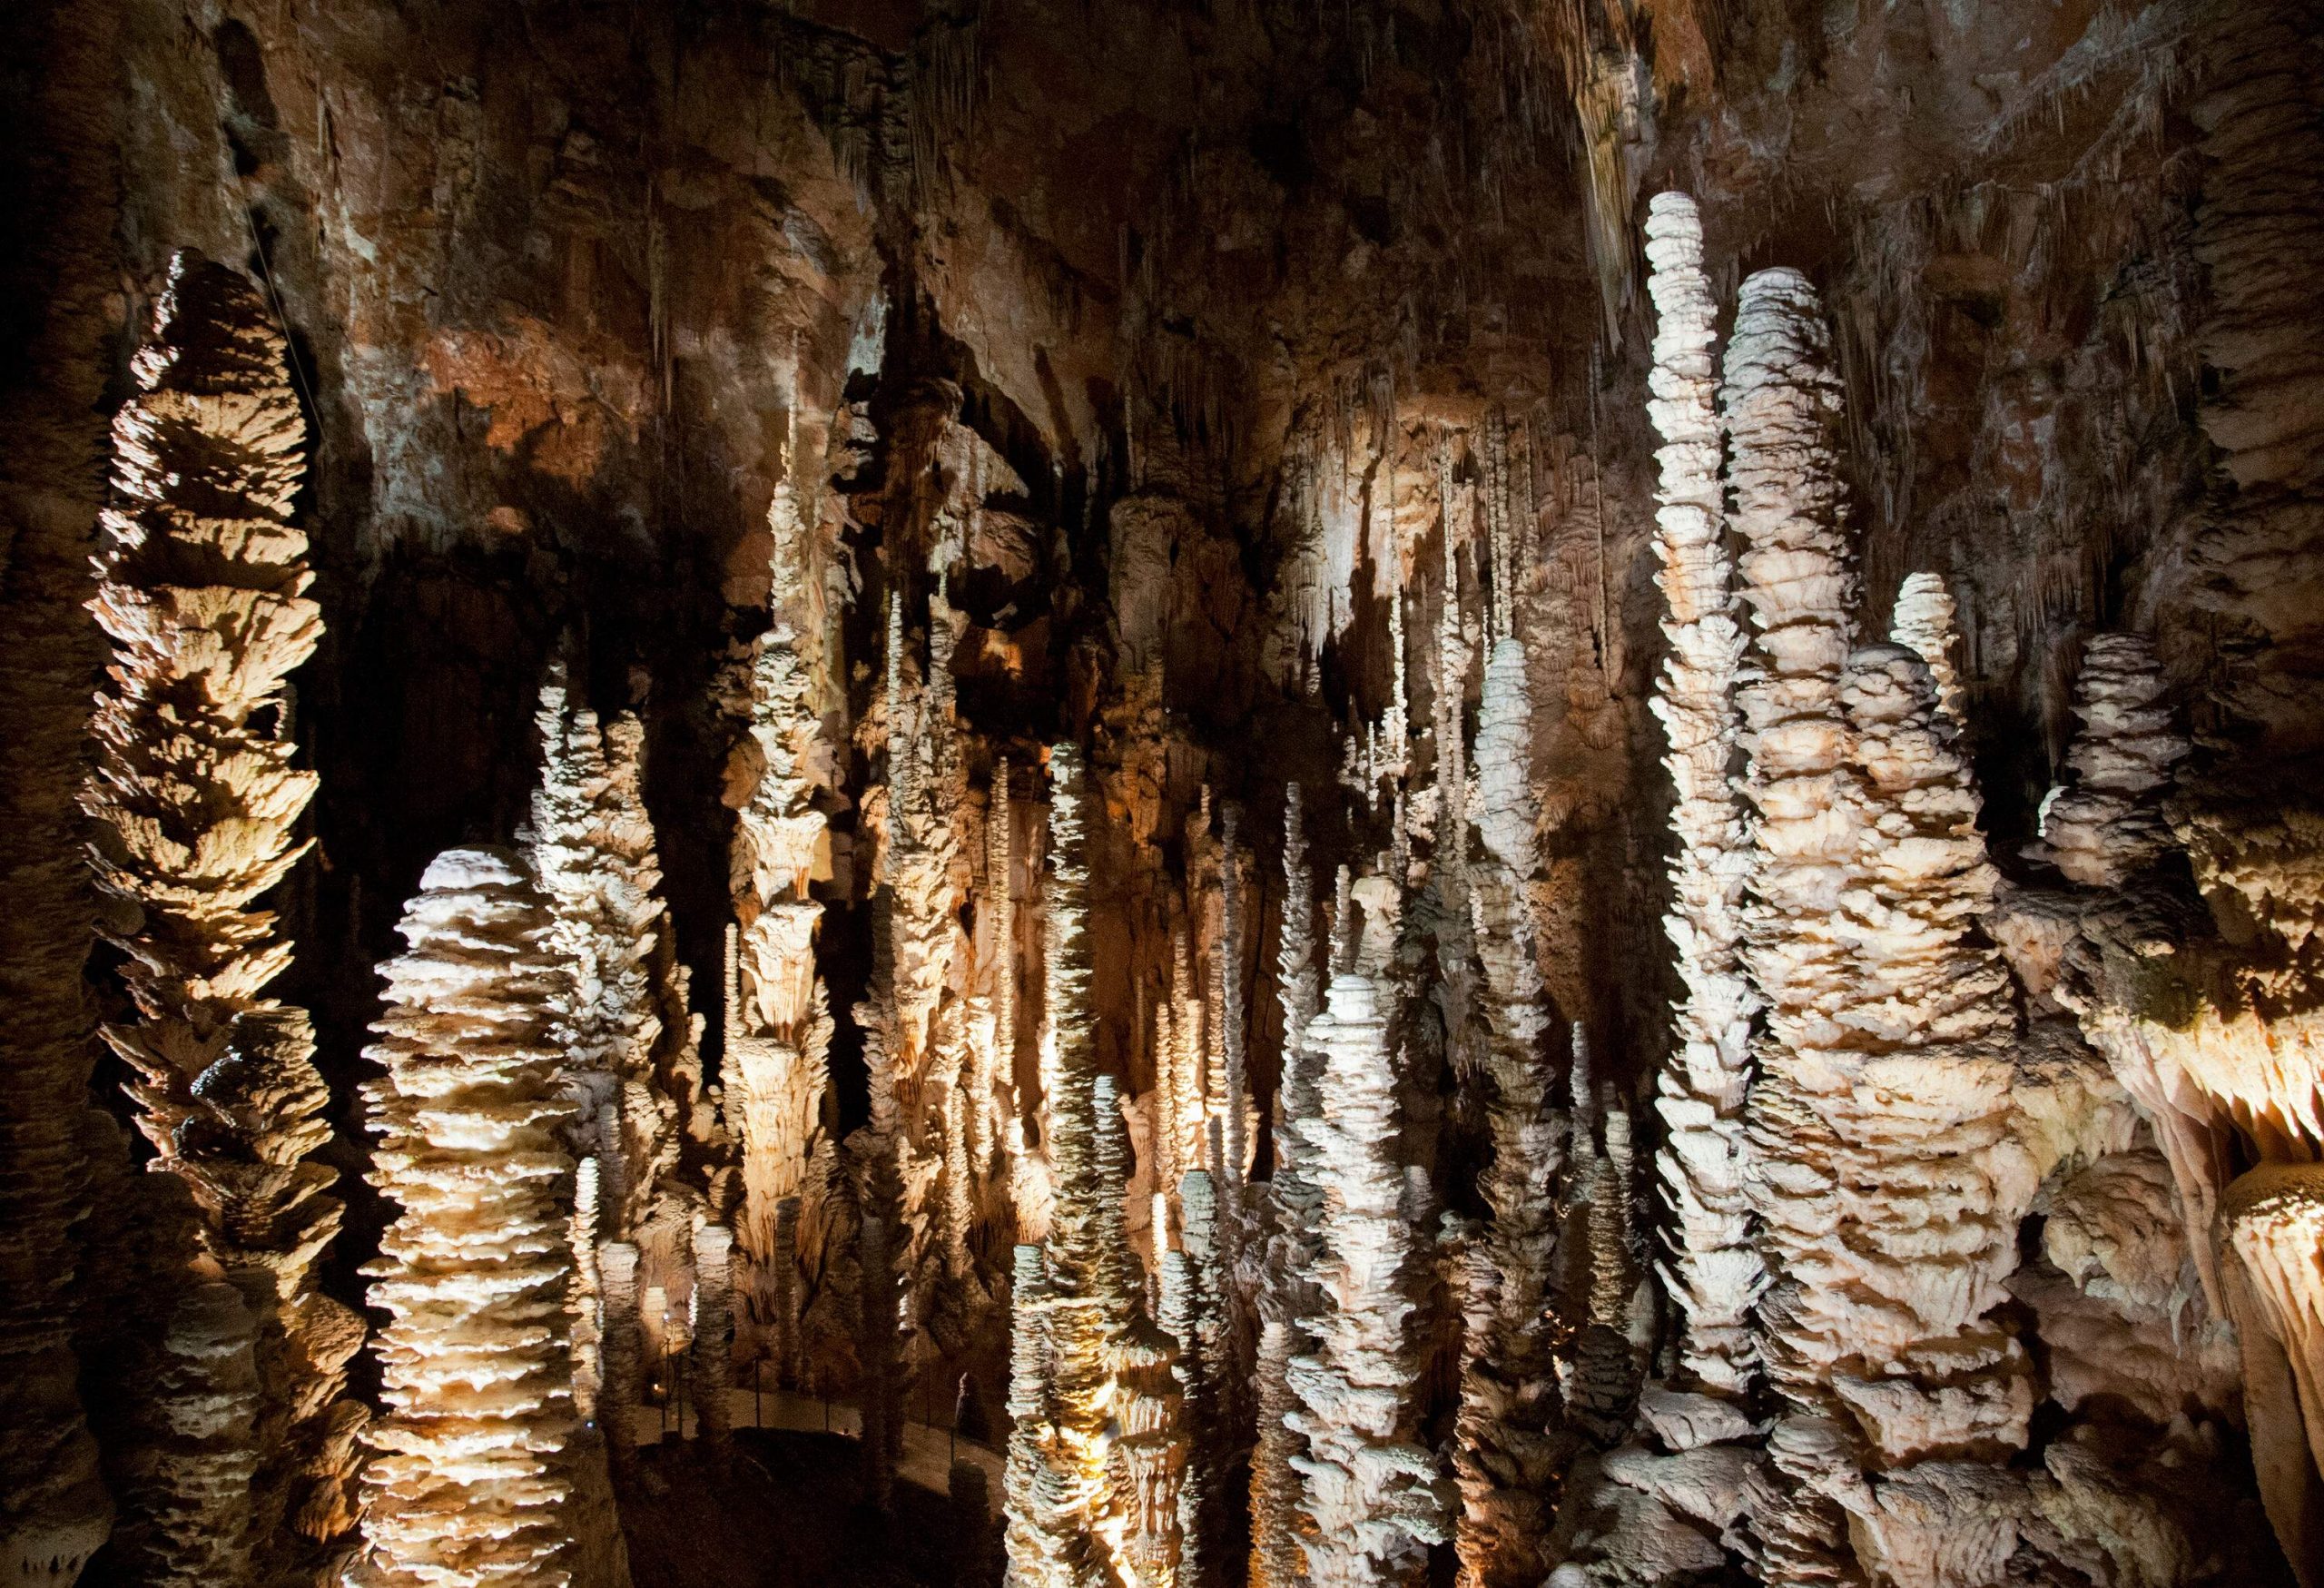 Illumination inside the cave reveals the varied heights of stalagmites and stalactites.